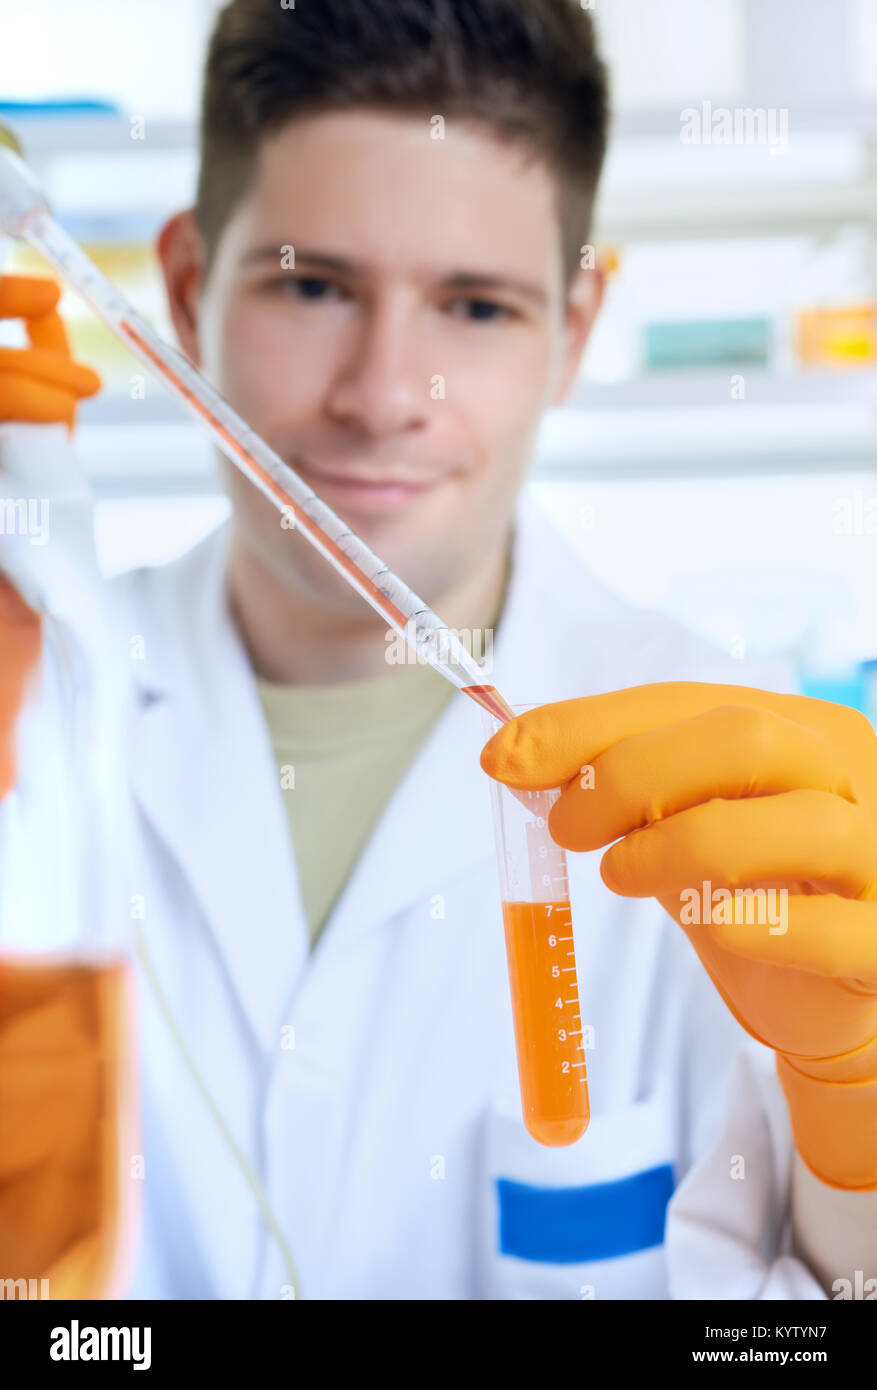 Young energetic scientist loads orange liquid sample in a tube. Scientific background, blurred face, focus on the tube. This image is toned. Stock Photo